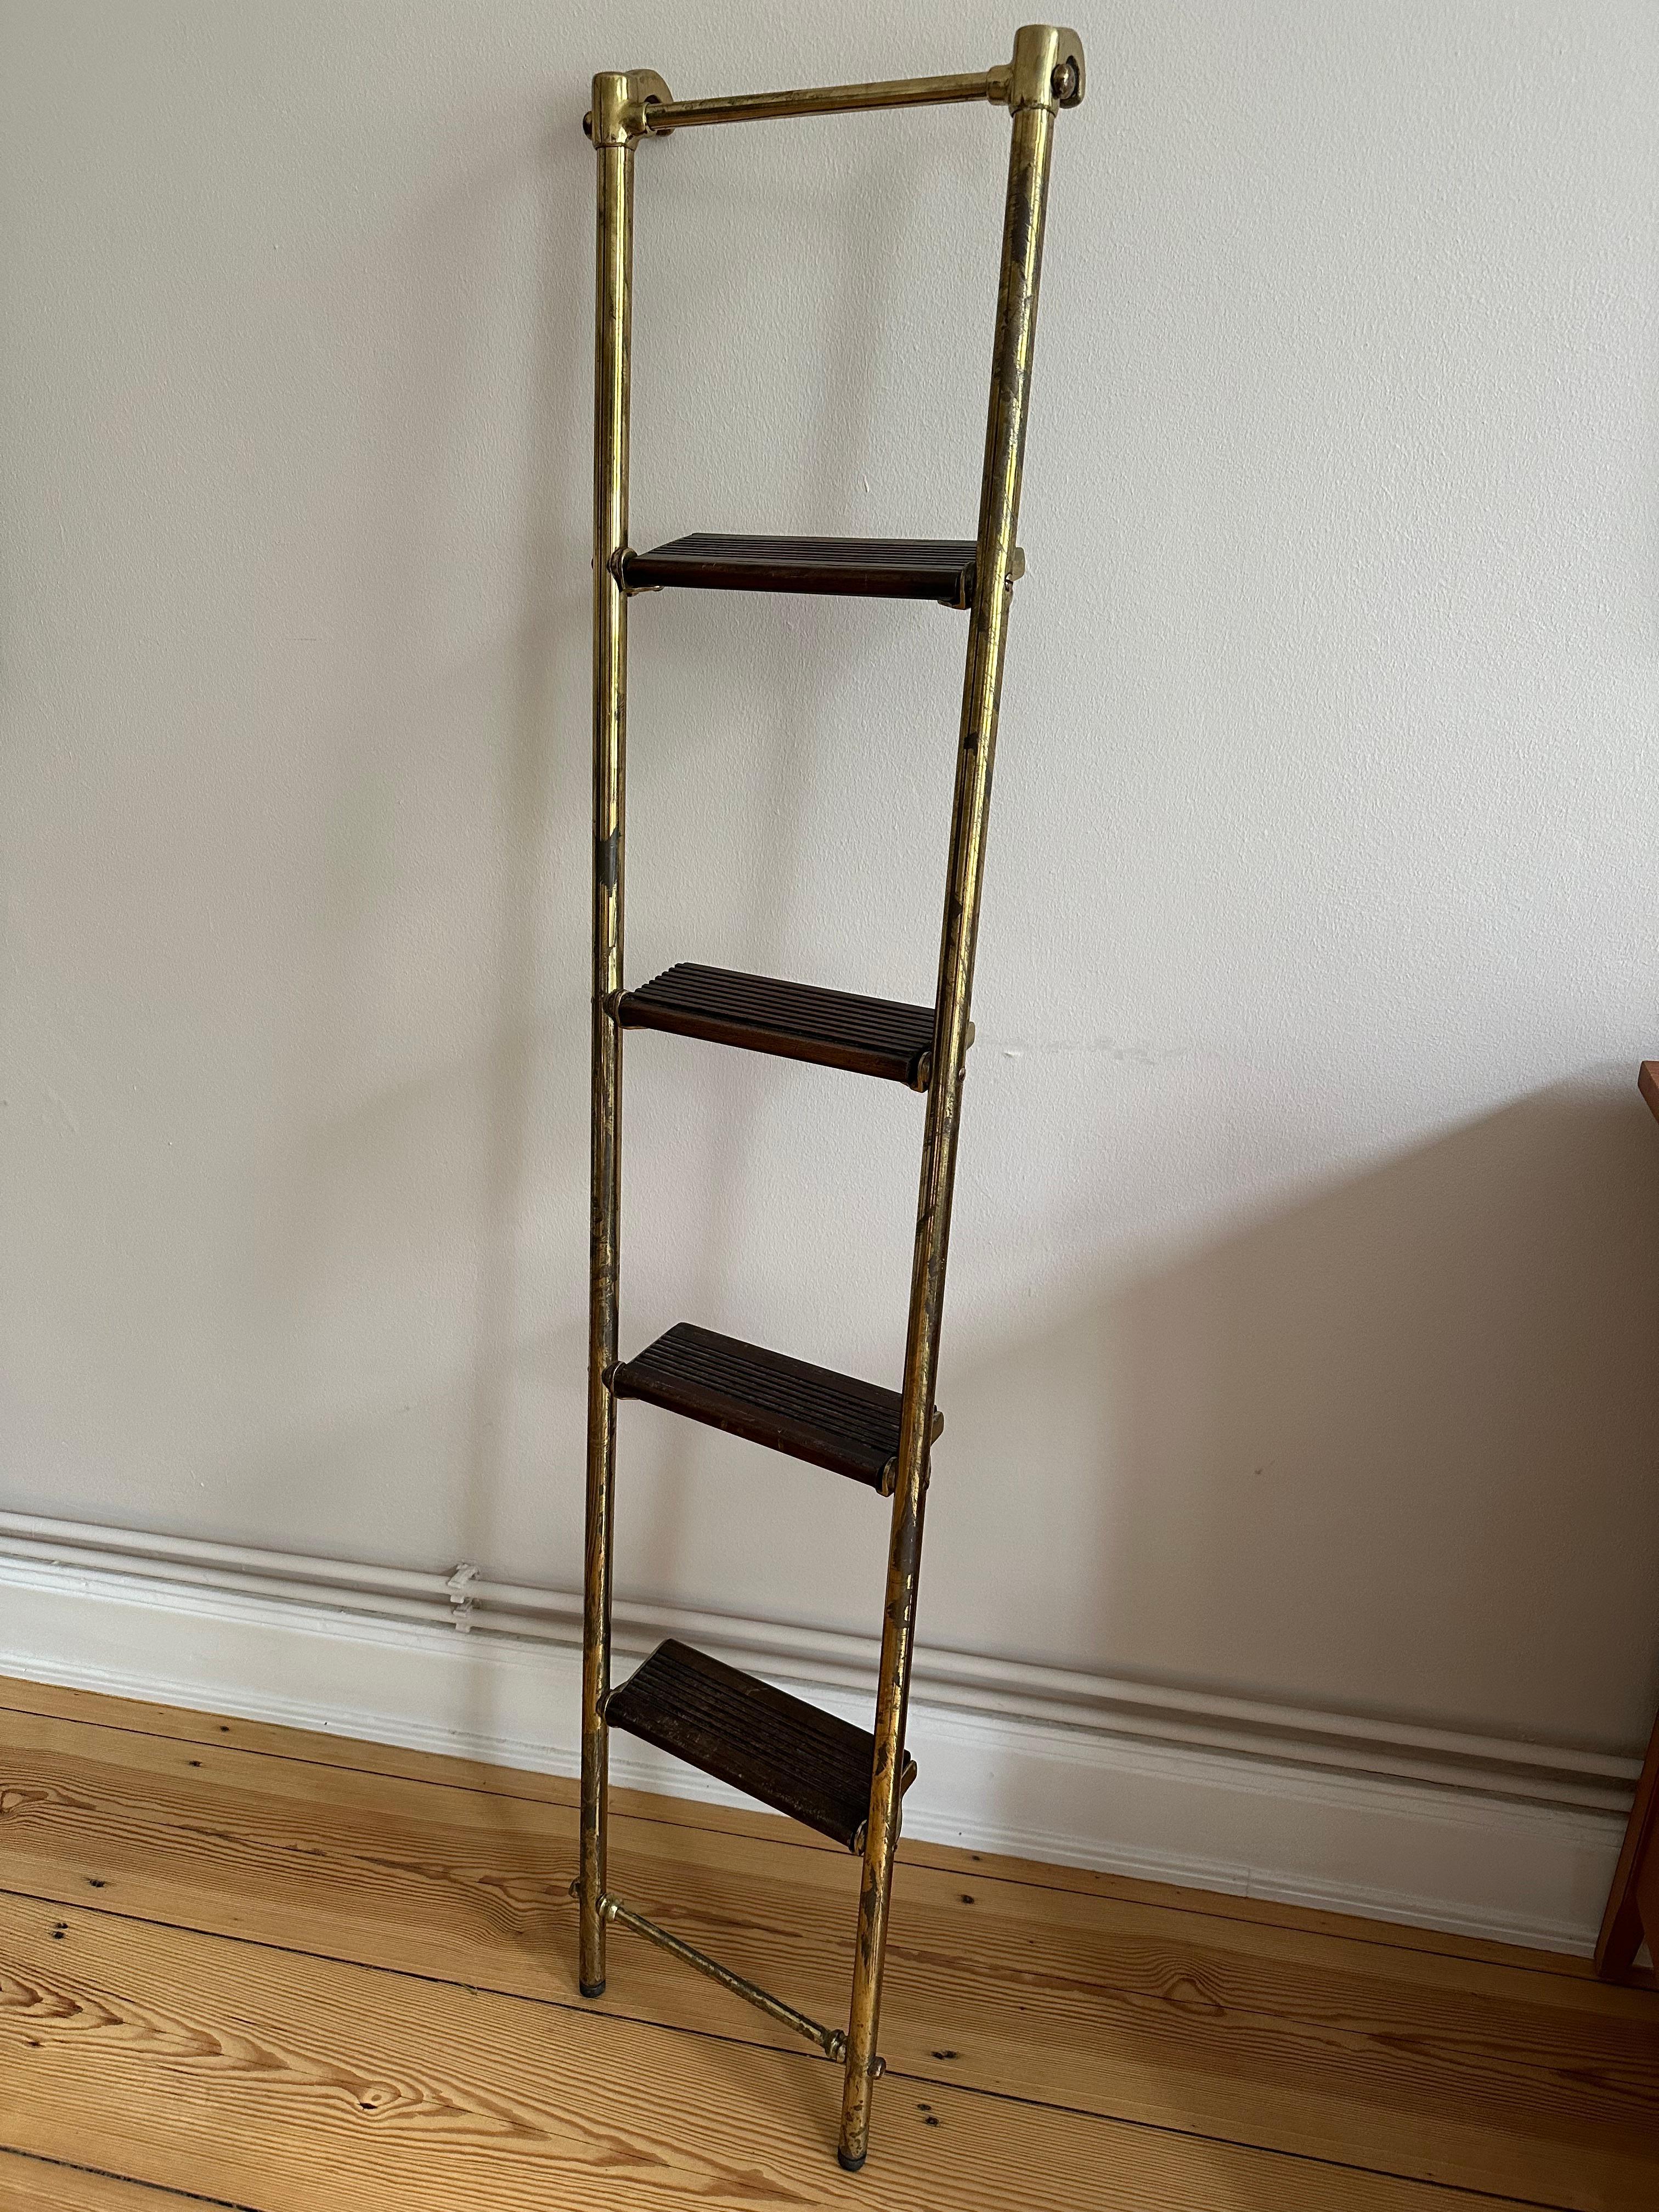 Step into the past with our authentic antique brass ship’s ladder dating back to the late 19th century. Originally crafted for ship cabins, this meticulously designed ladder seamlessly combines functionality with aesthetic appeal.

Featuring finely